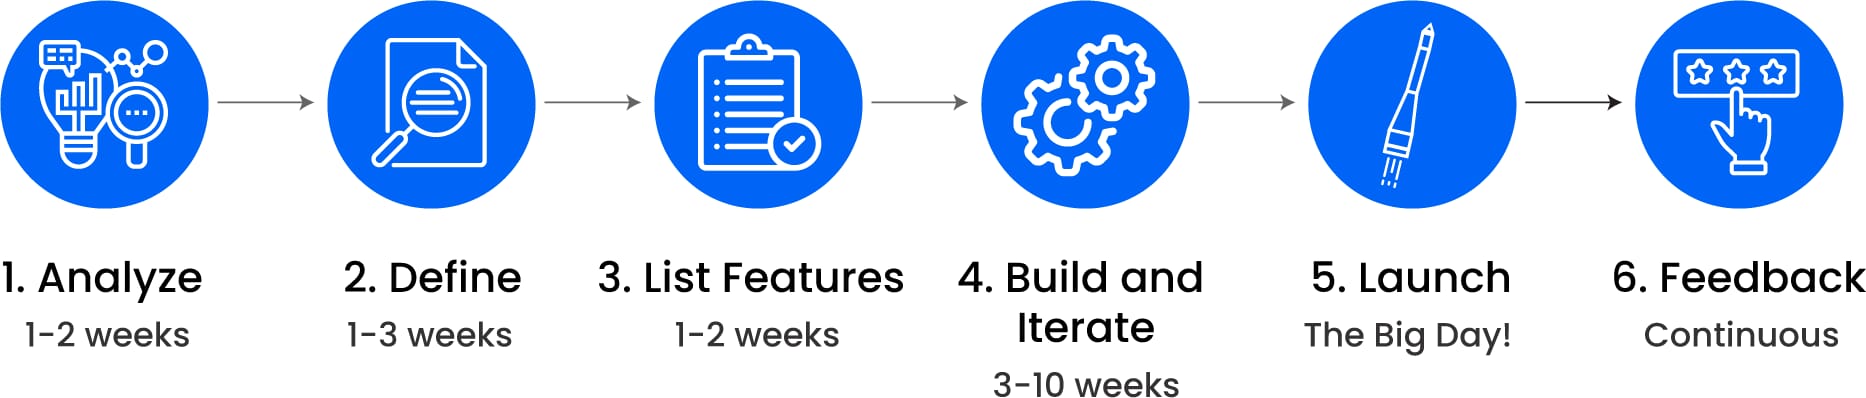 How to build and MVP step-by-step